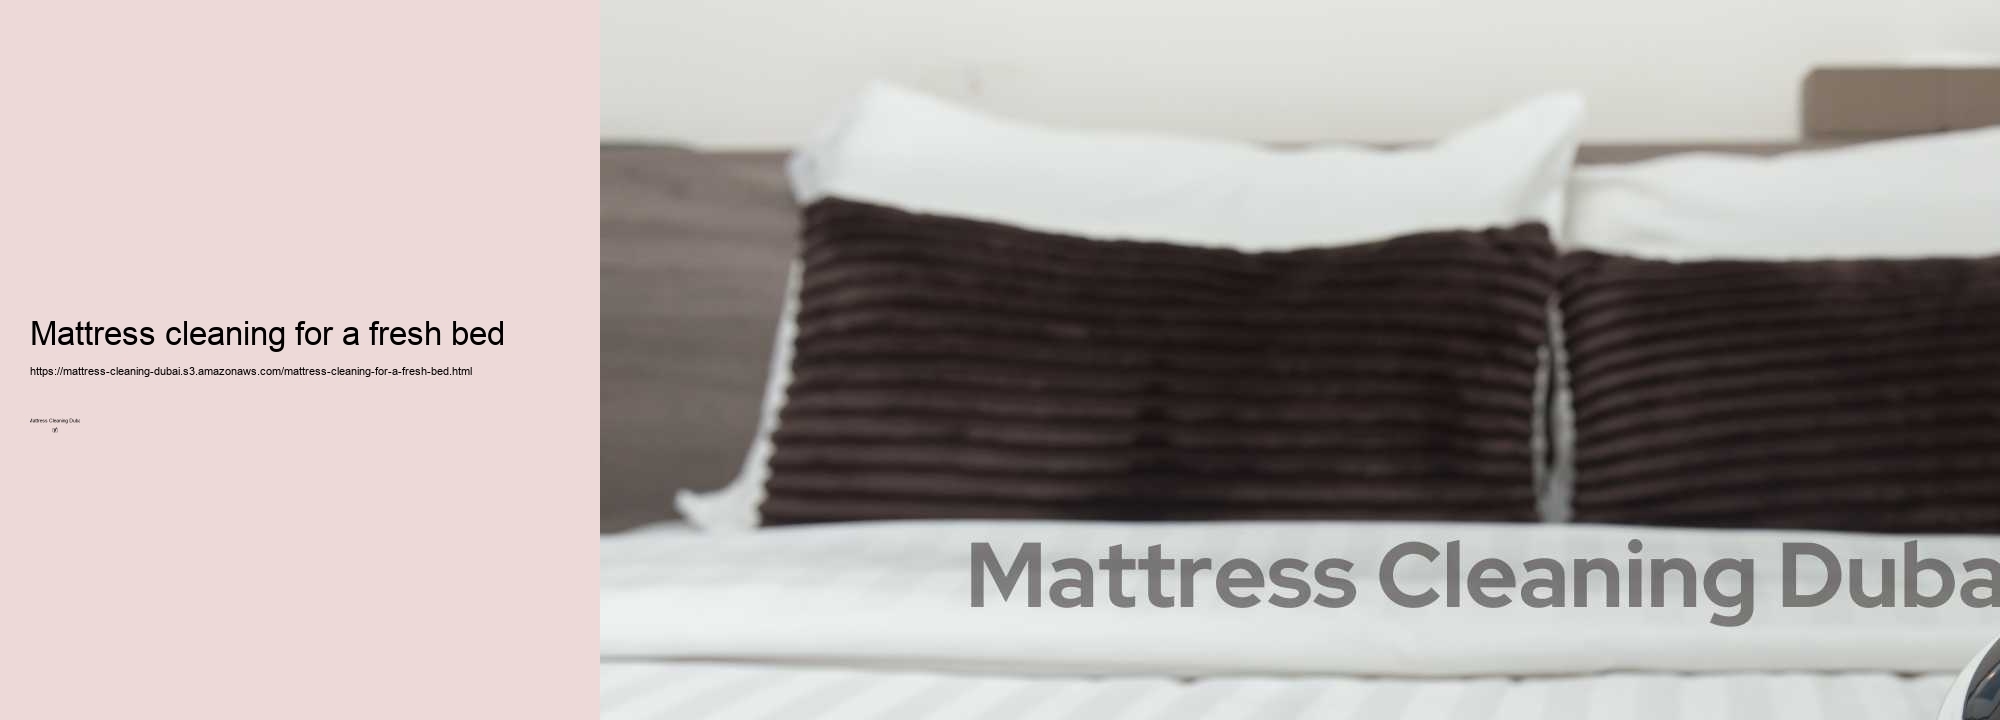 Mattress cleaning for a fresh bed